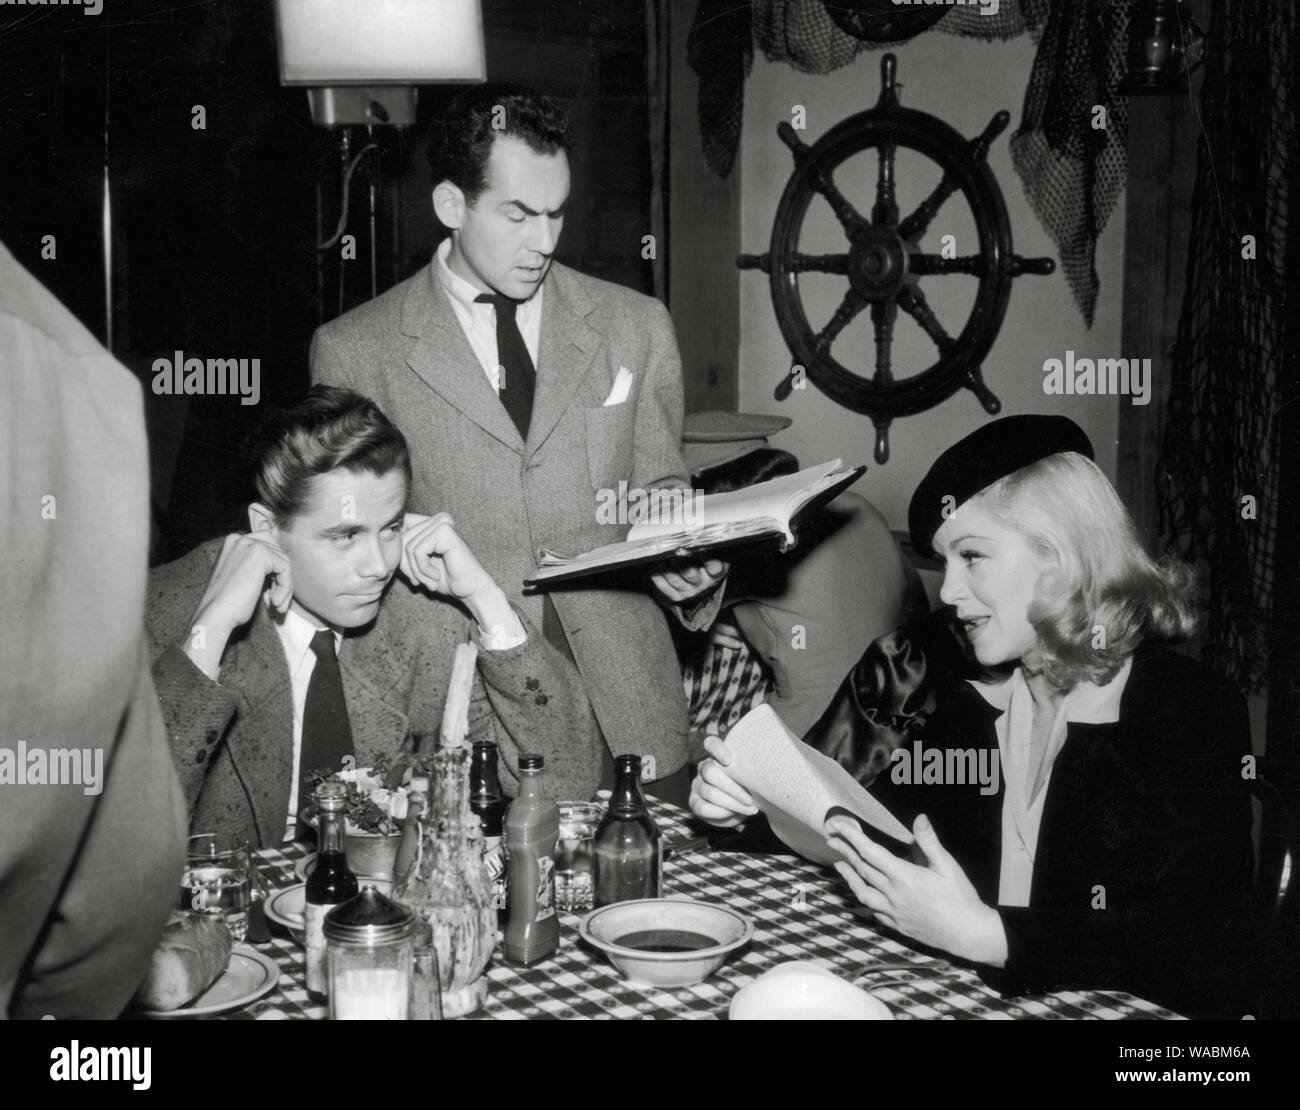 Glenn Ford and Claire Trevor as they rehearse dialogue with Michael Gordon for the film, 'The Adventures of Martin Eden' (1941) Columbia Pictures  File Reference # 33848-508THA Stock Photo